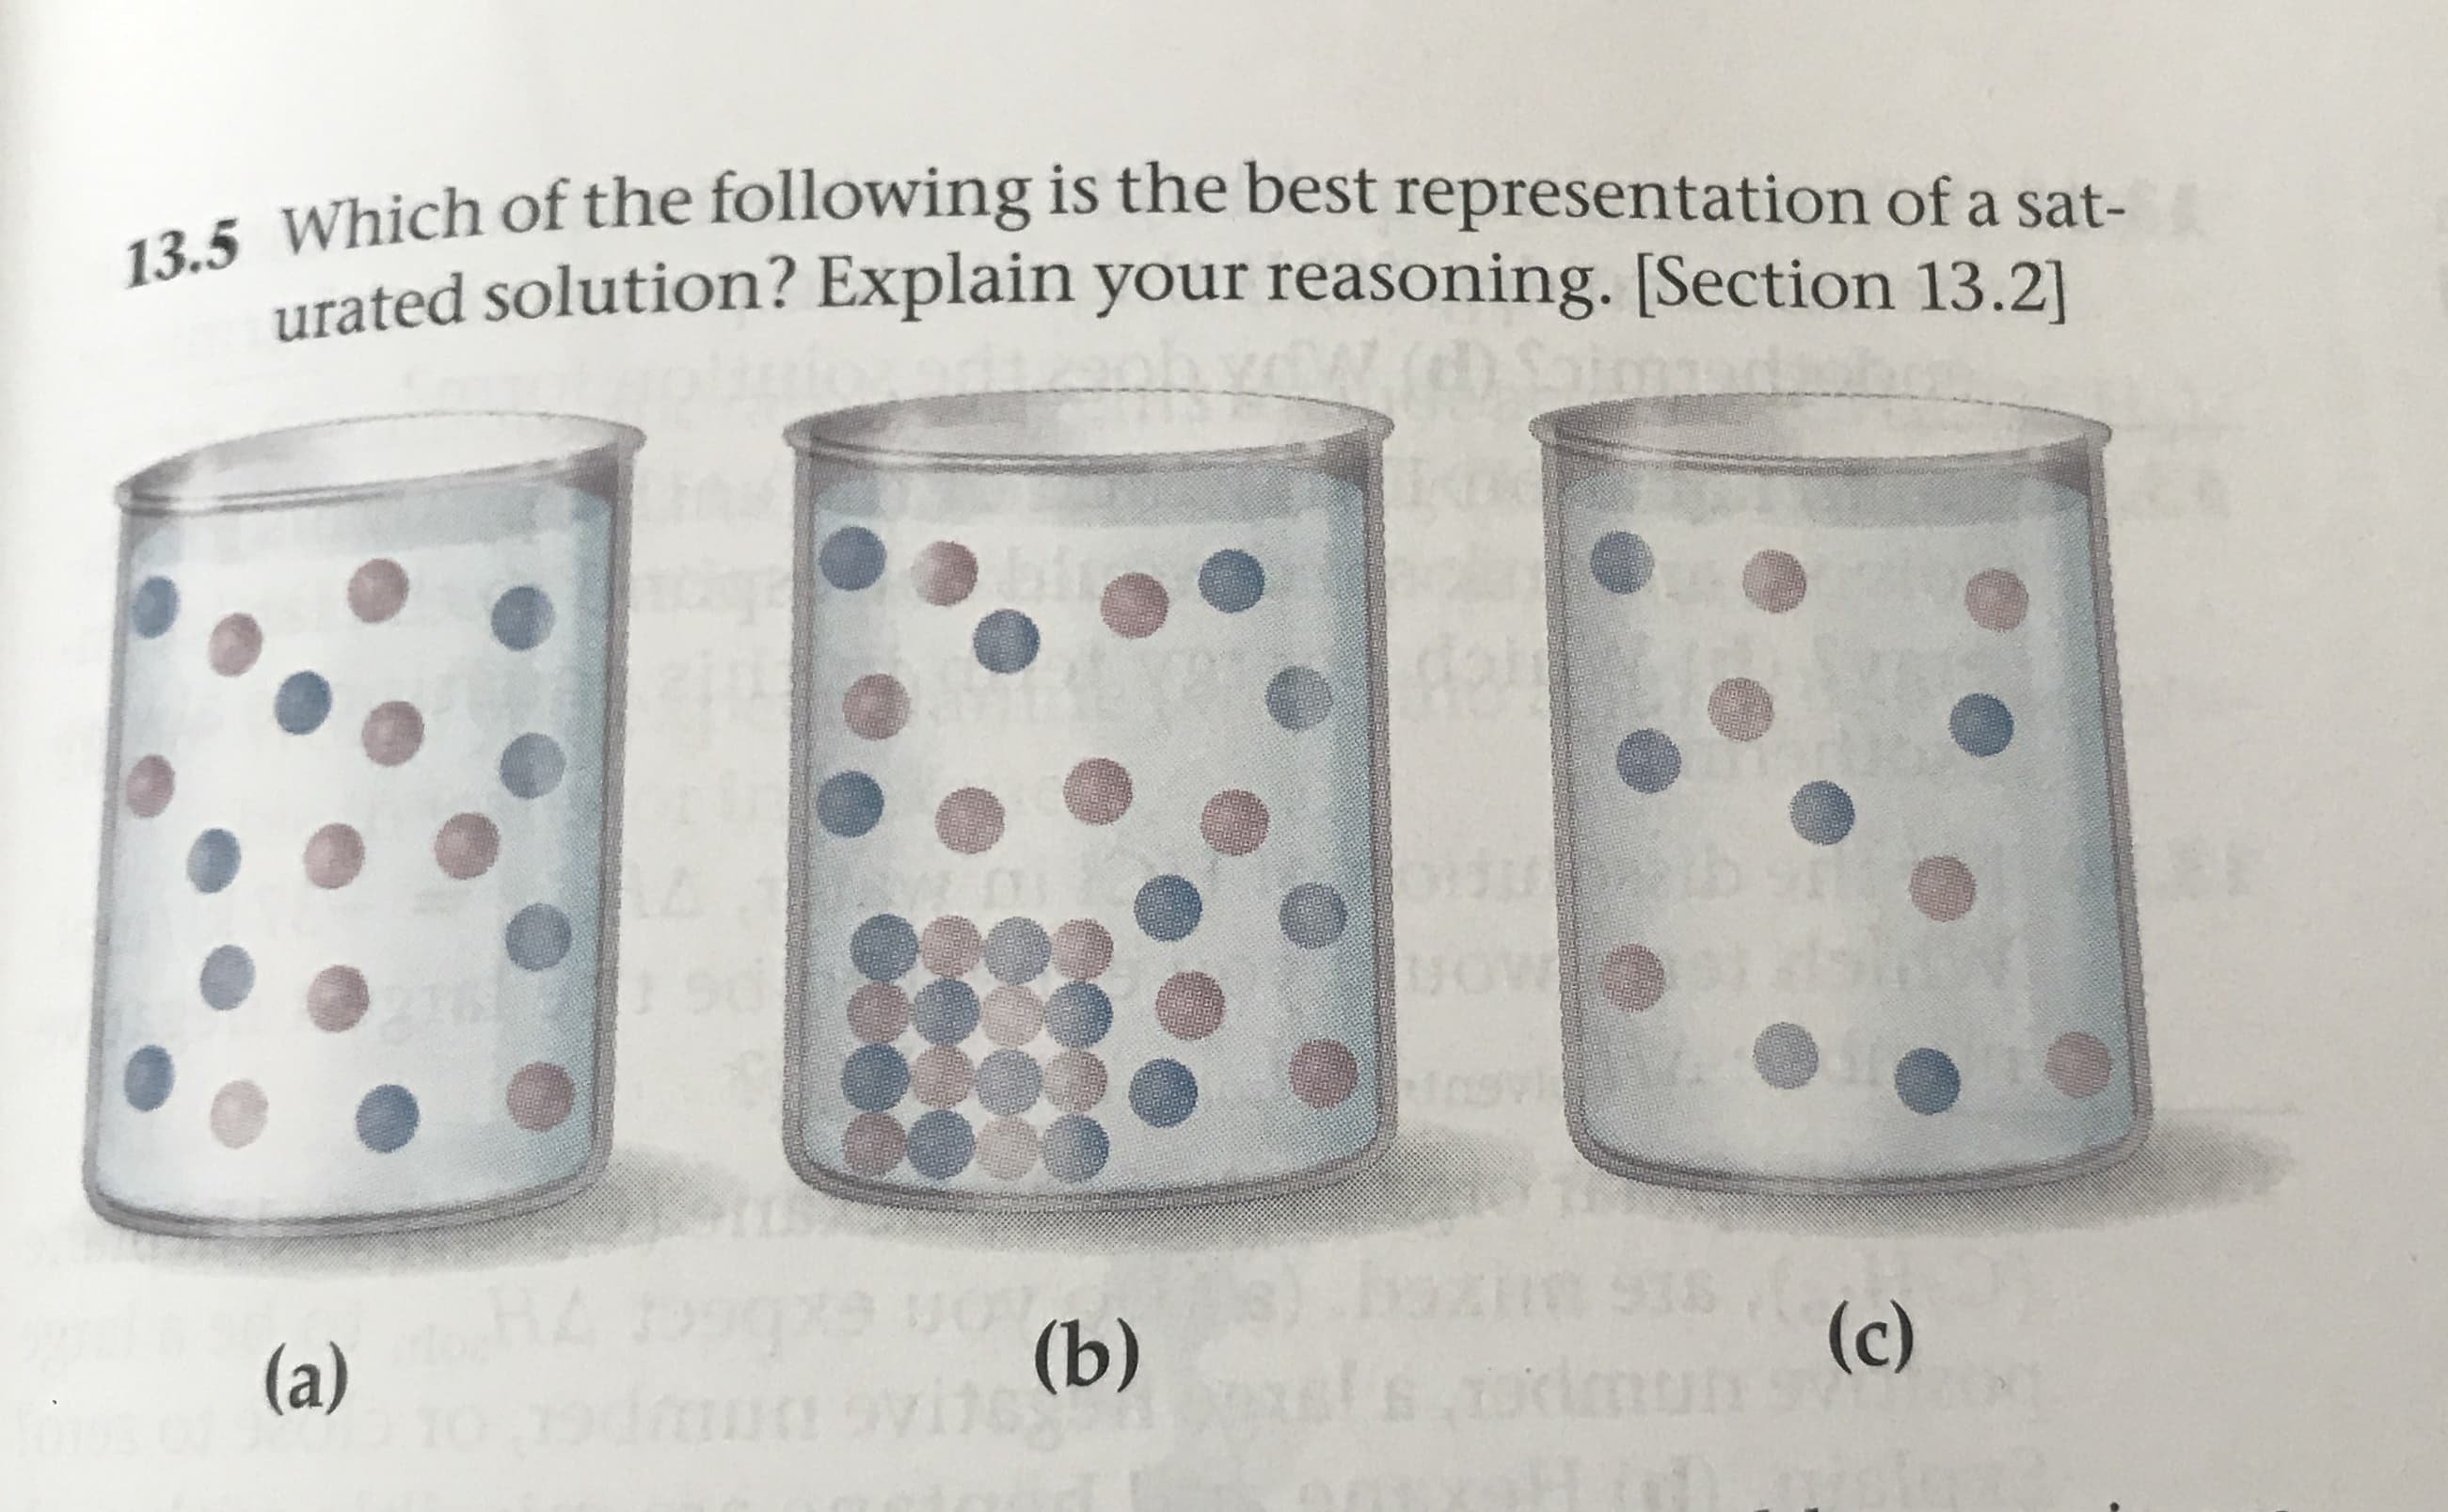 13.5 Which of the following is the best representation of a sat-
urated solution? Explain your reasoning. [Section 13.2
-h yW.
s)
279 VOV
(b)
0:
(c)
ur
938
(a)
RCTAG DOIUD
